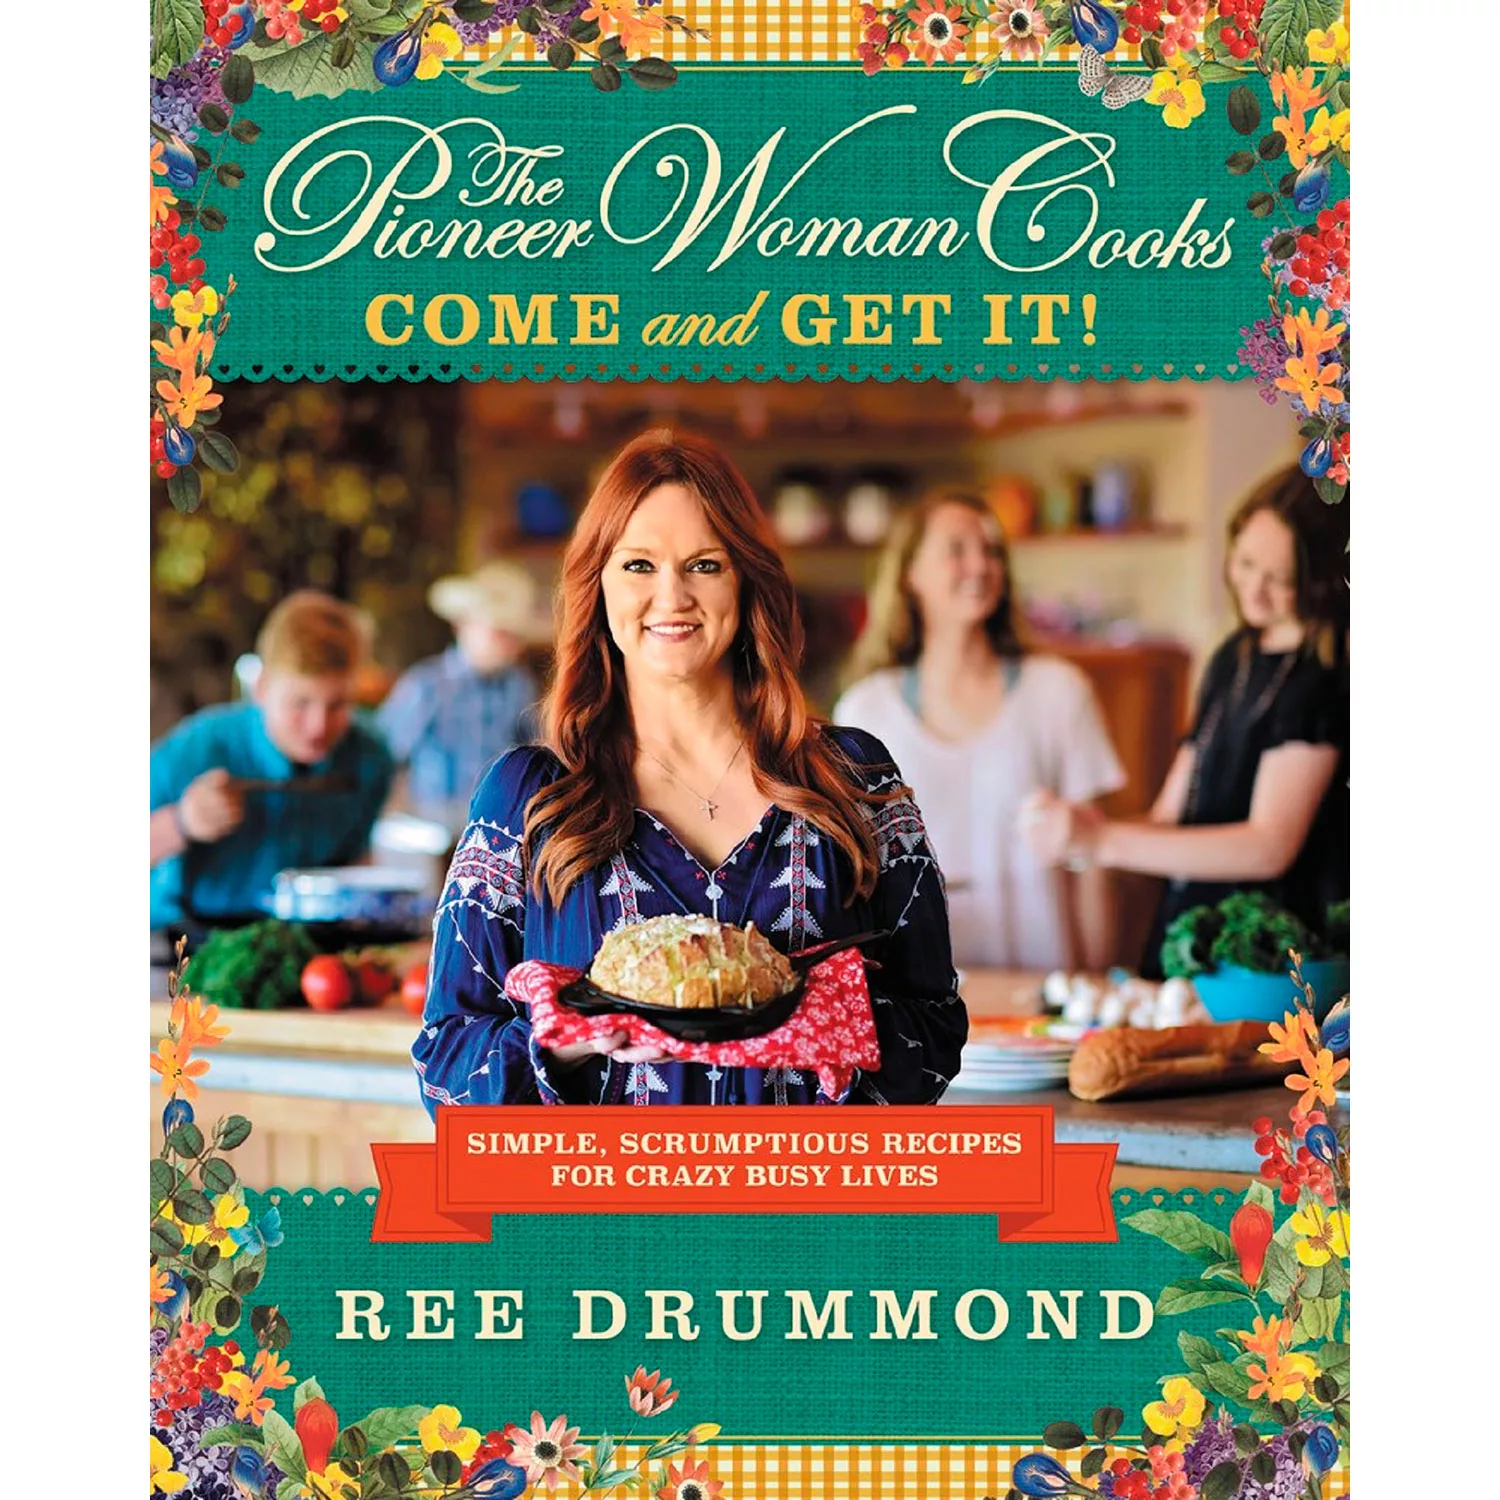 Pioneer Woman Cookbook ONLY $5.97 at Sam’s